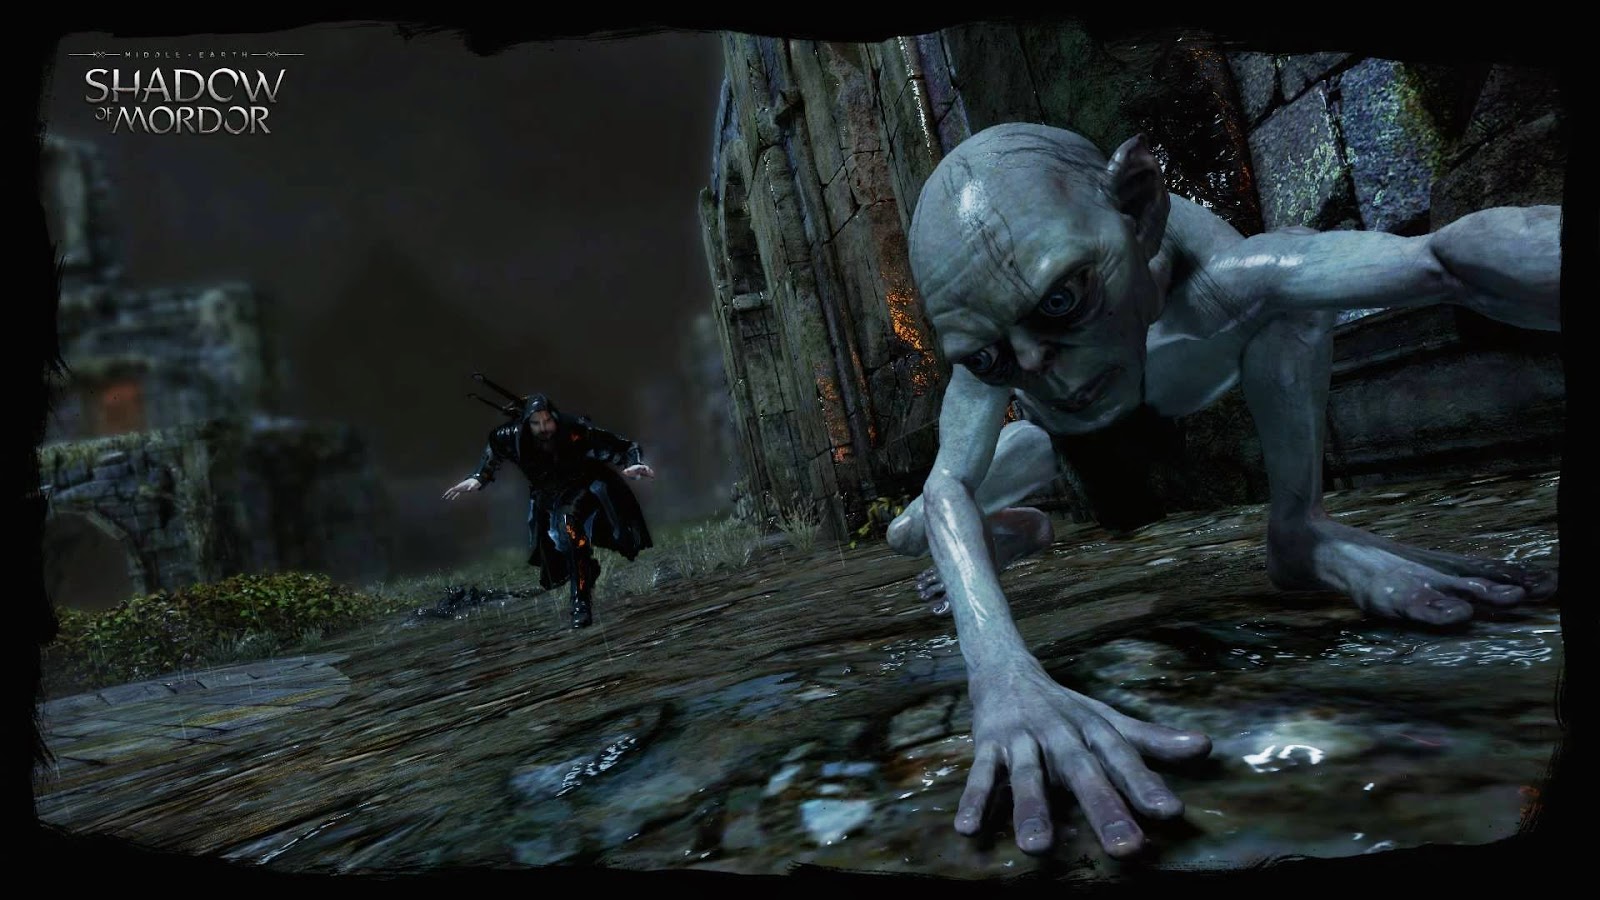 Middle-earth: Shadow of Mordor Infinite Combo Video Shows Impressive Skill